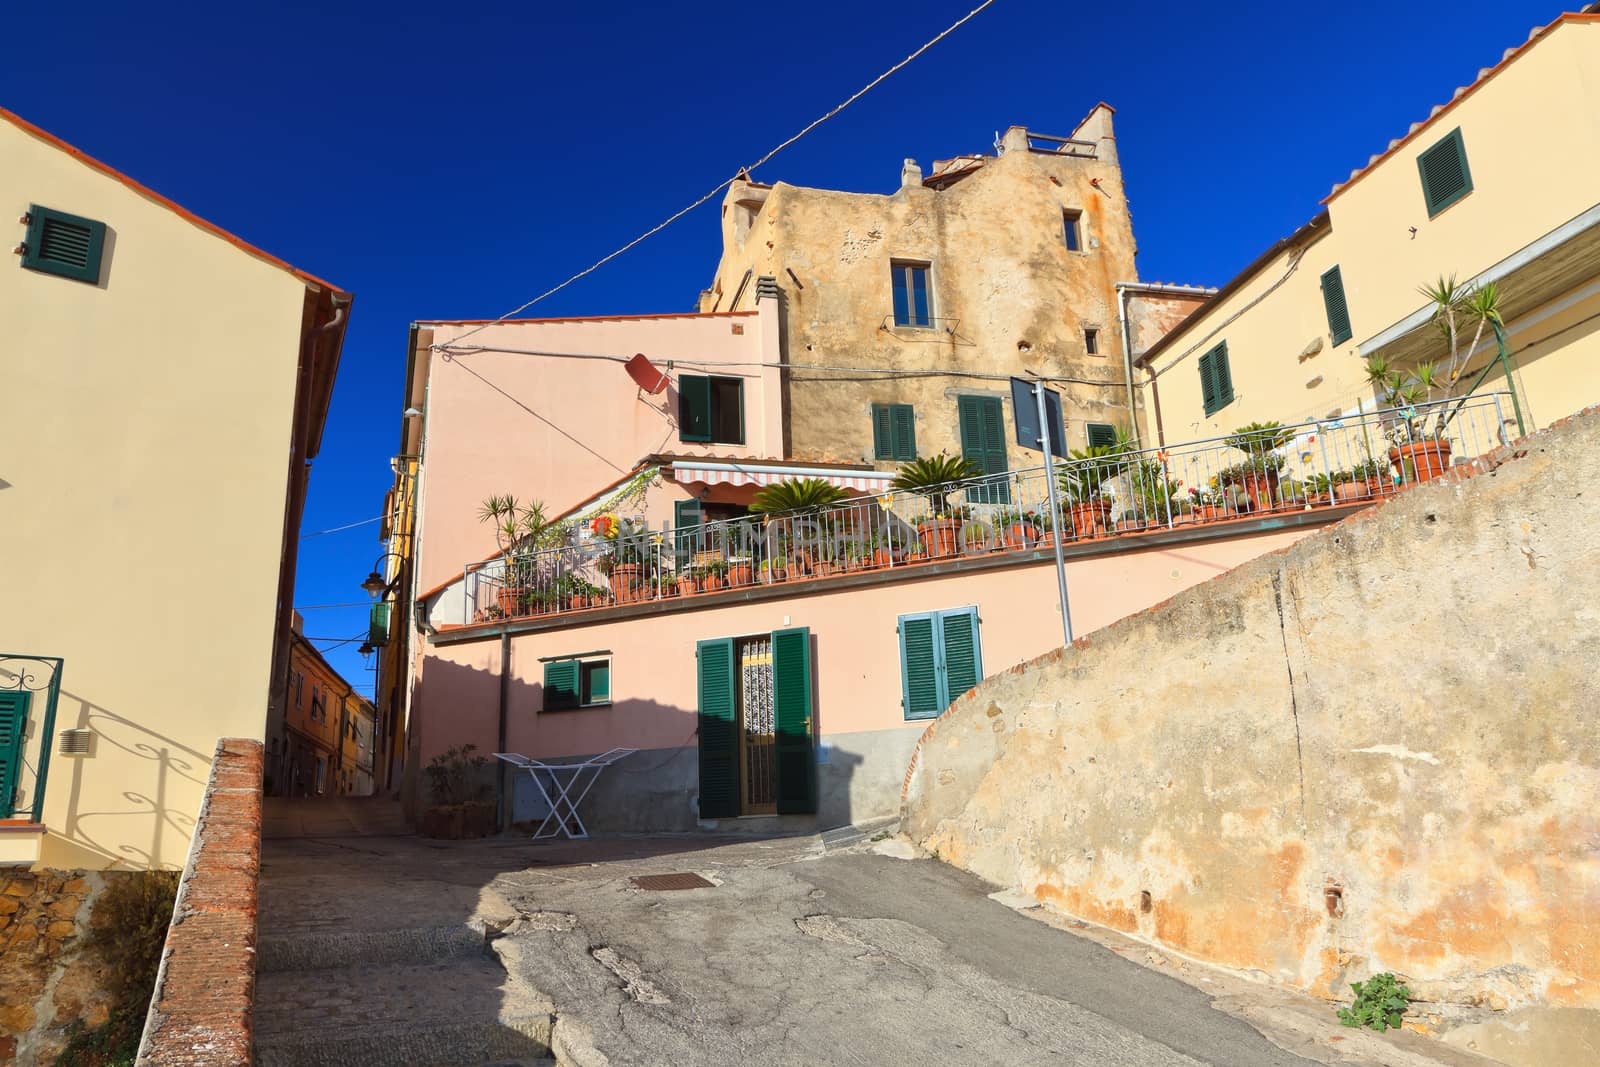 urban view in Capoliveri, ancient small town in Elba island, Italy